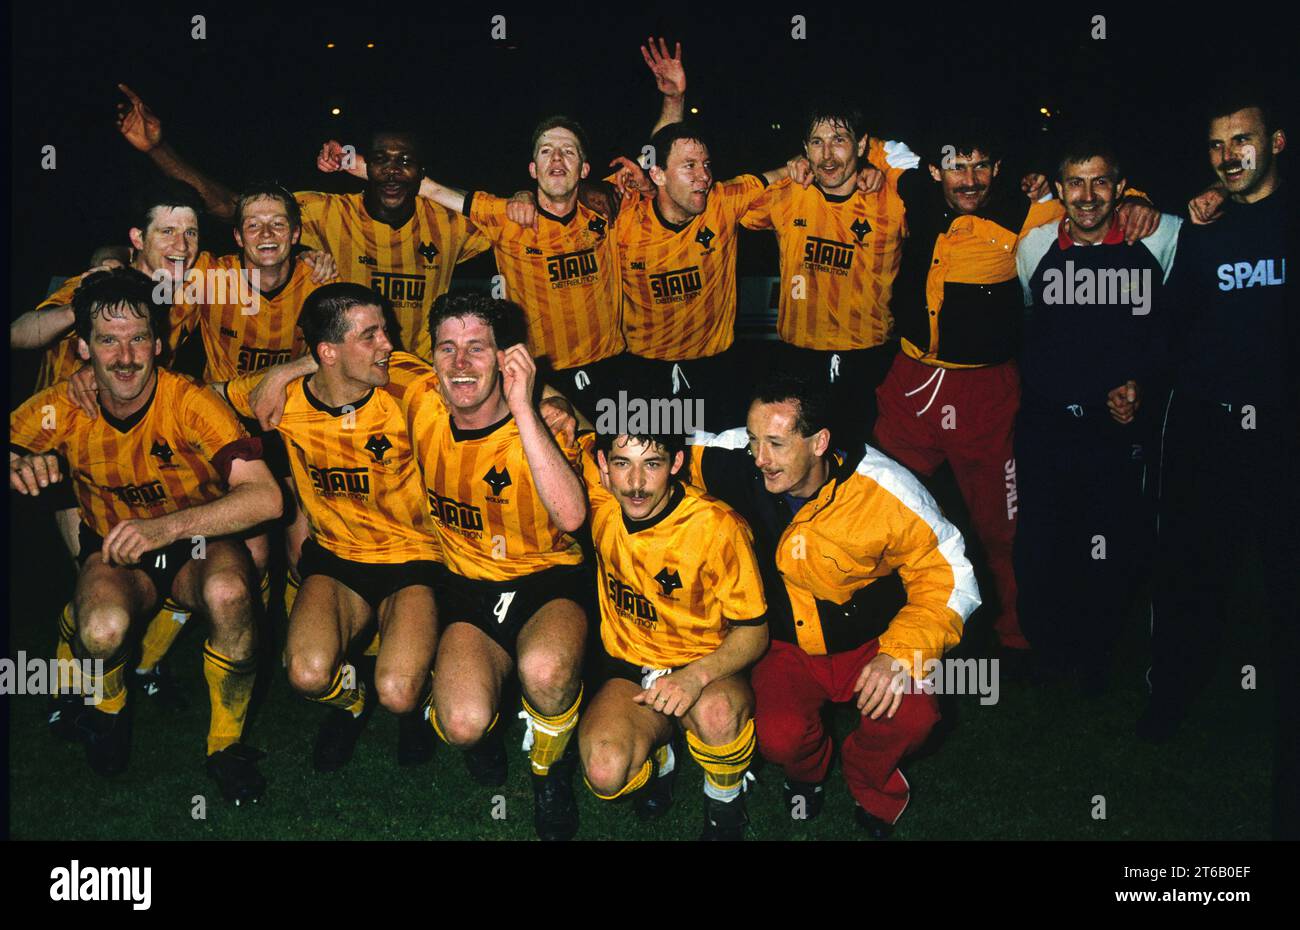 Promotion les loups célèbrent le 1988 mai. Front Alistair Robertson, Steve Bull, Micky Holmes, Andy Thompson, Nigel Vaughan. Derrière Andy Mutch, Keith Downing, Floyd Streete, Phil Robinson, Gary Bellamy, Jackie Gallagher, Barry Powell, Paul Darby. Banque D'Images